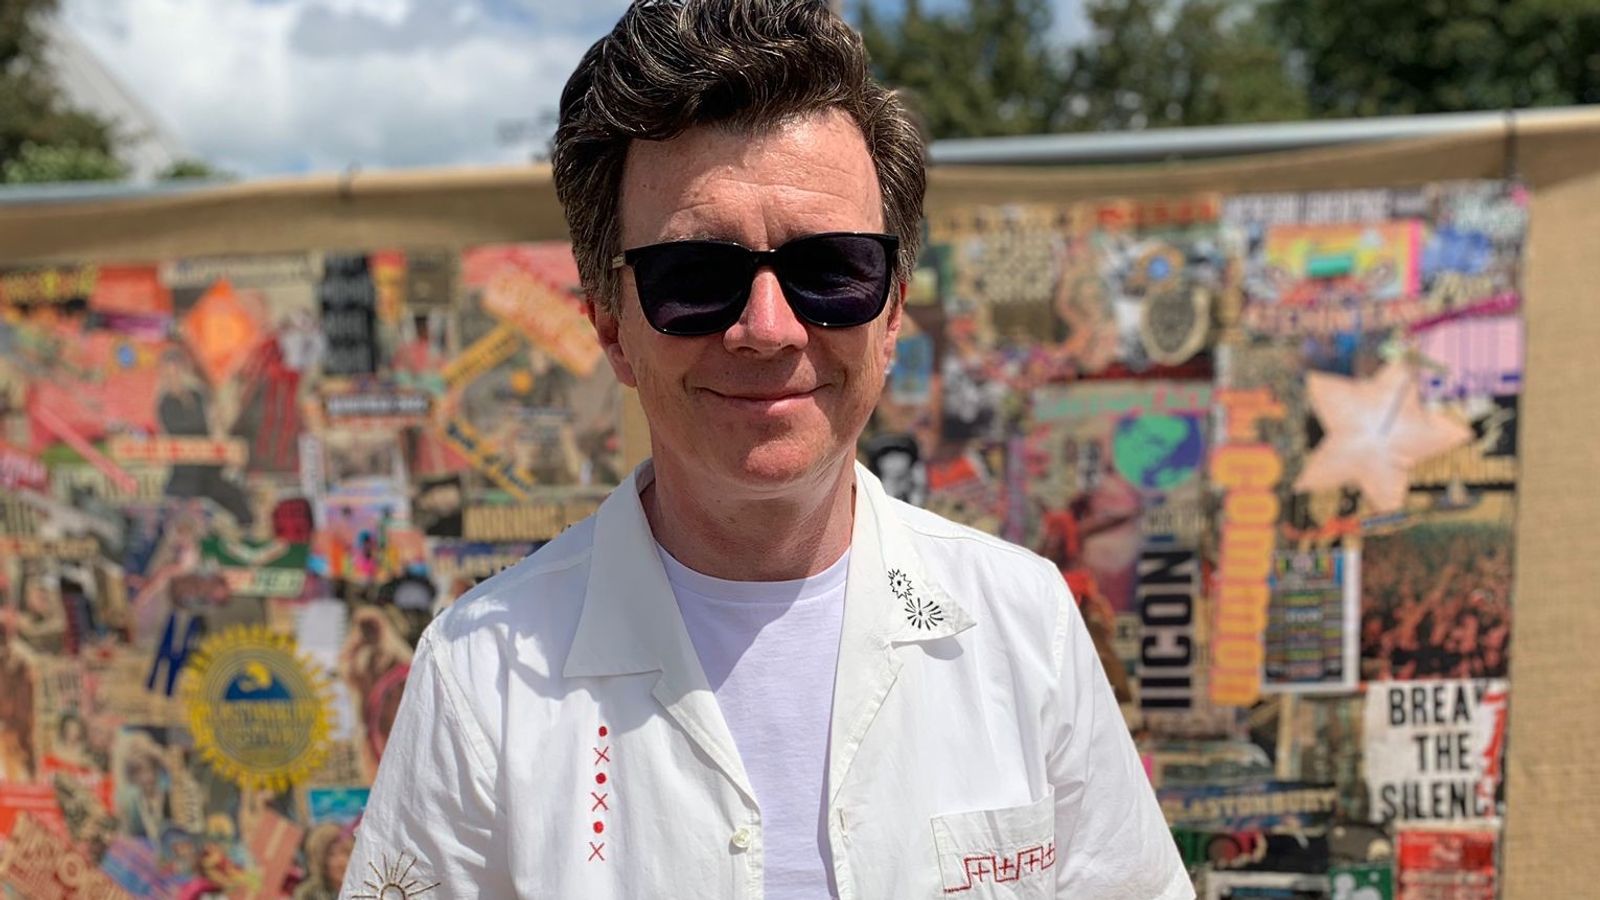 Glastonbury virgins: Rick Astley gets ready for his first time - just like Elton John